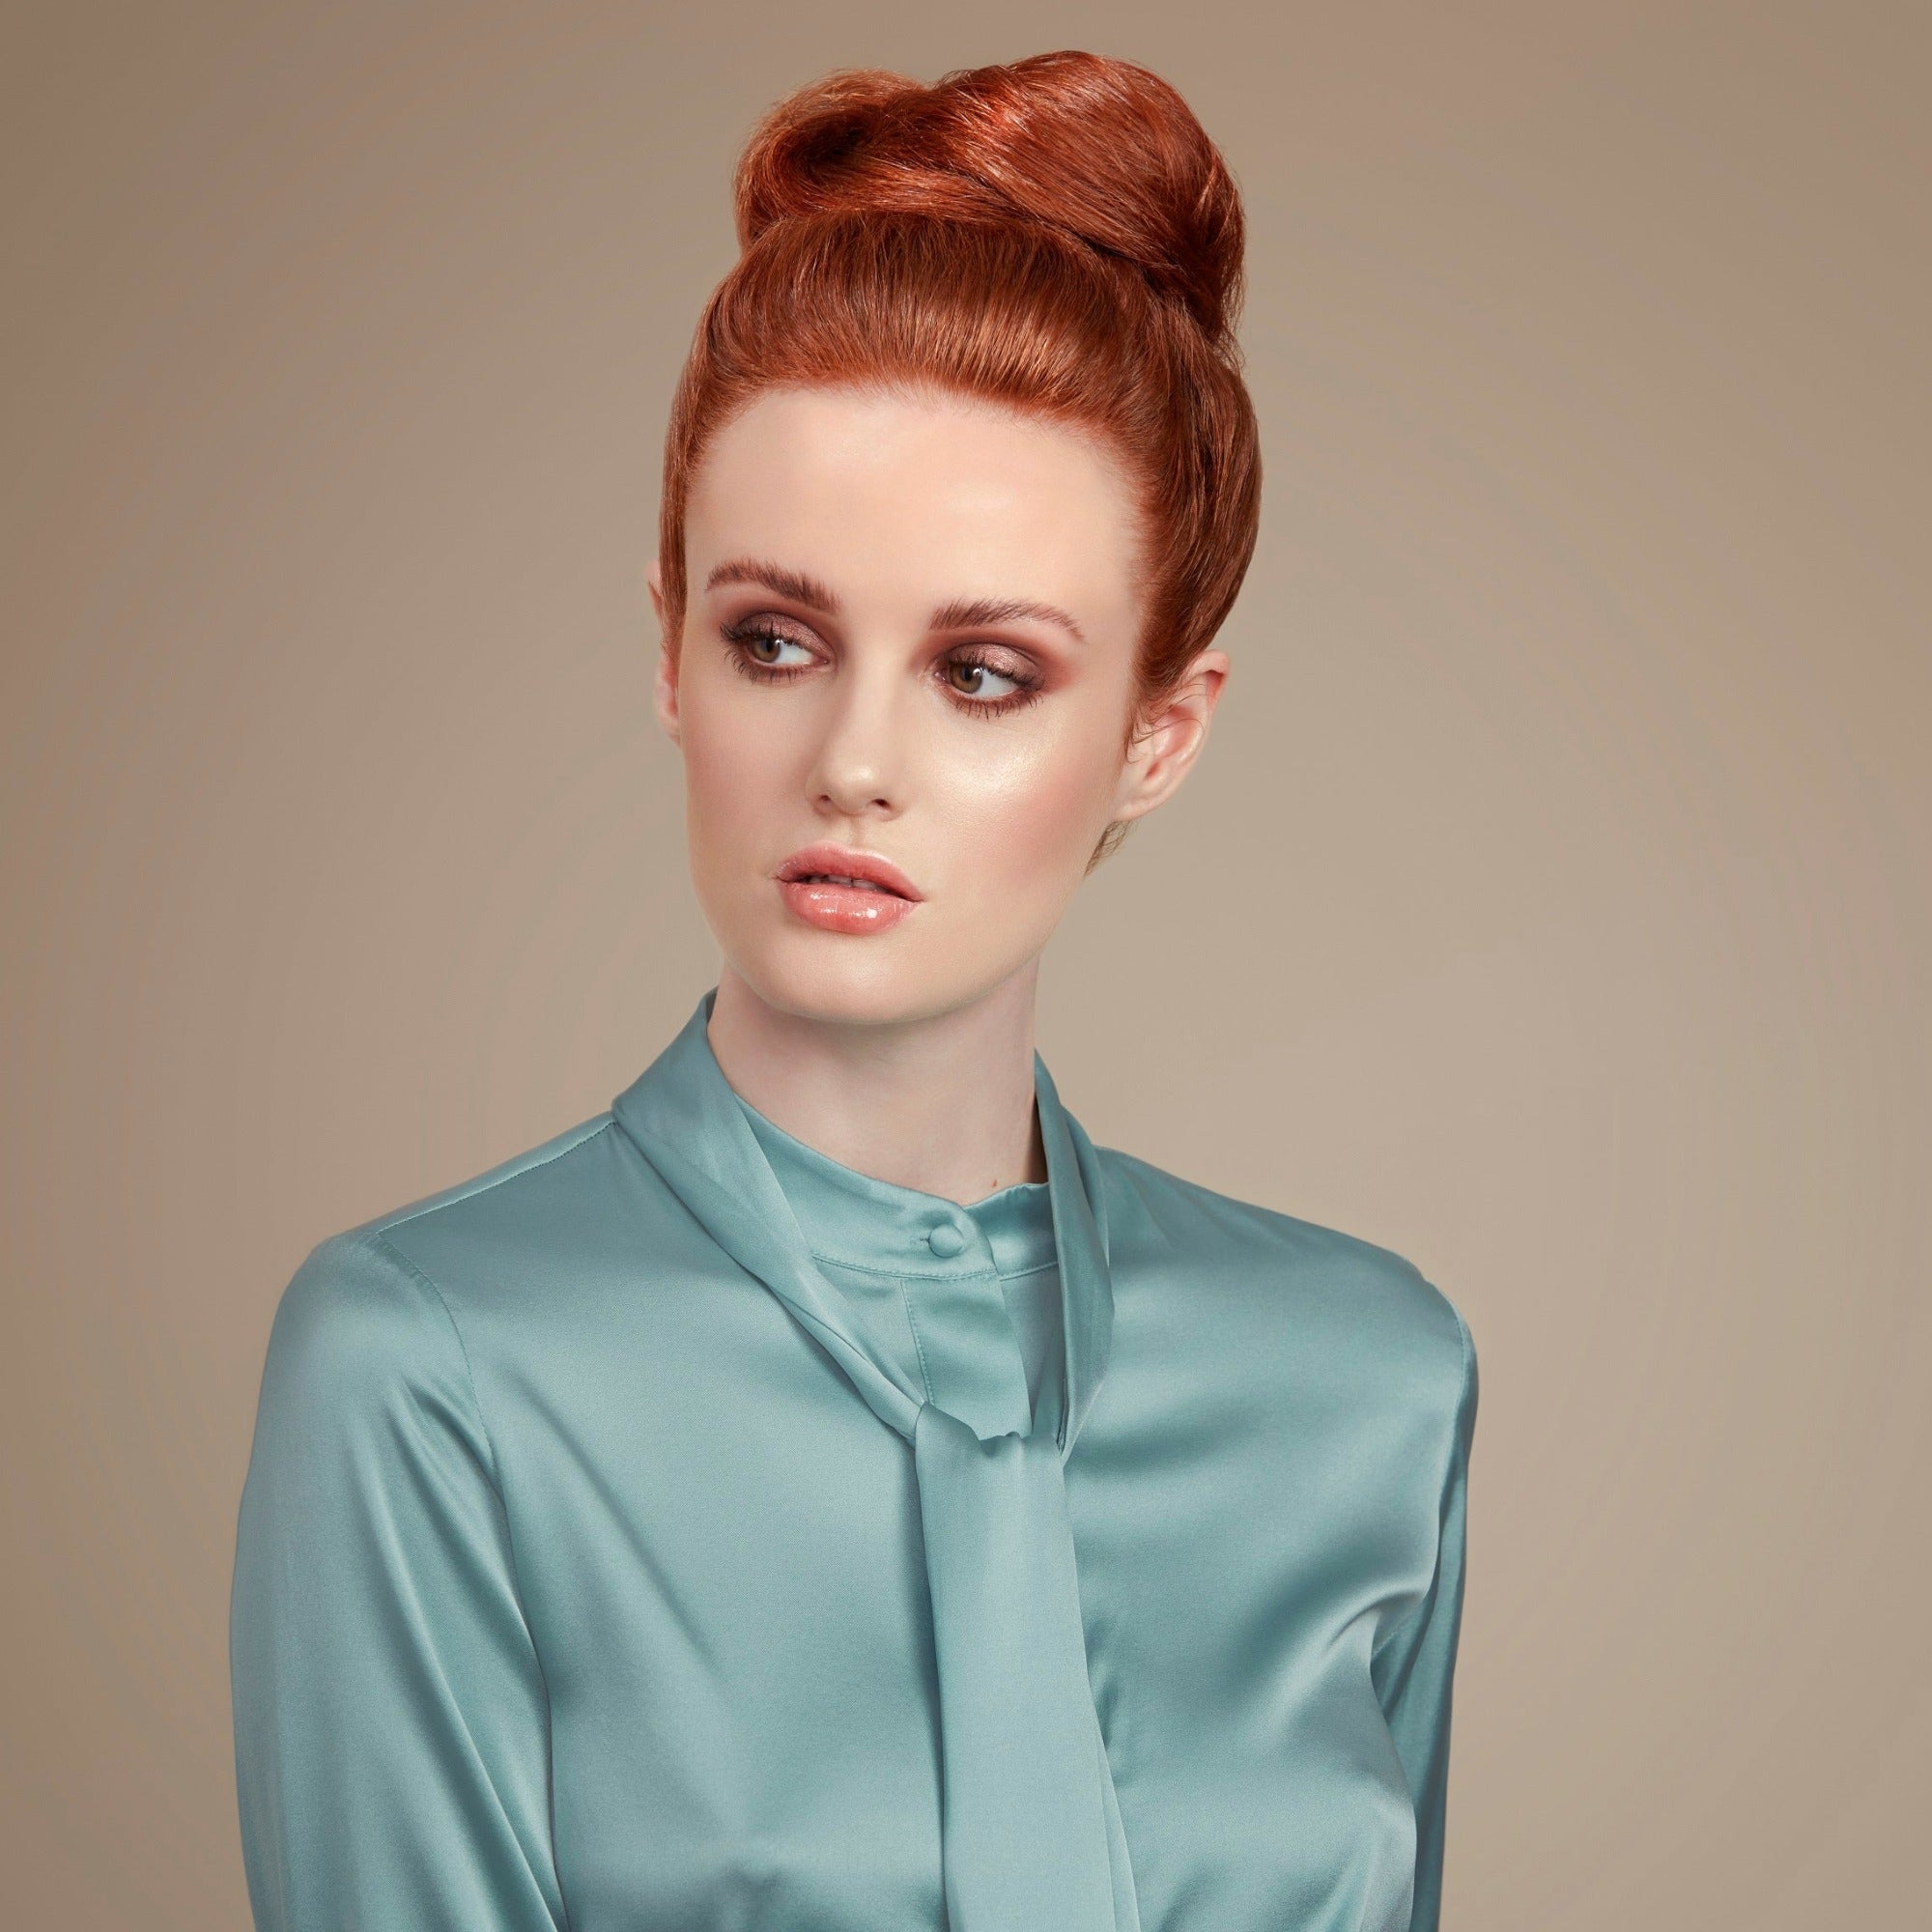 Female model with red hair in a high bun held in place with Moo and Yoo hair spray.  She is facing the camera and looking to her left. She is wearing a pale blue top that is long sleeved and has a high neck. 